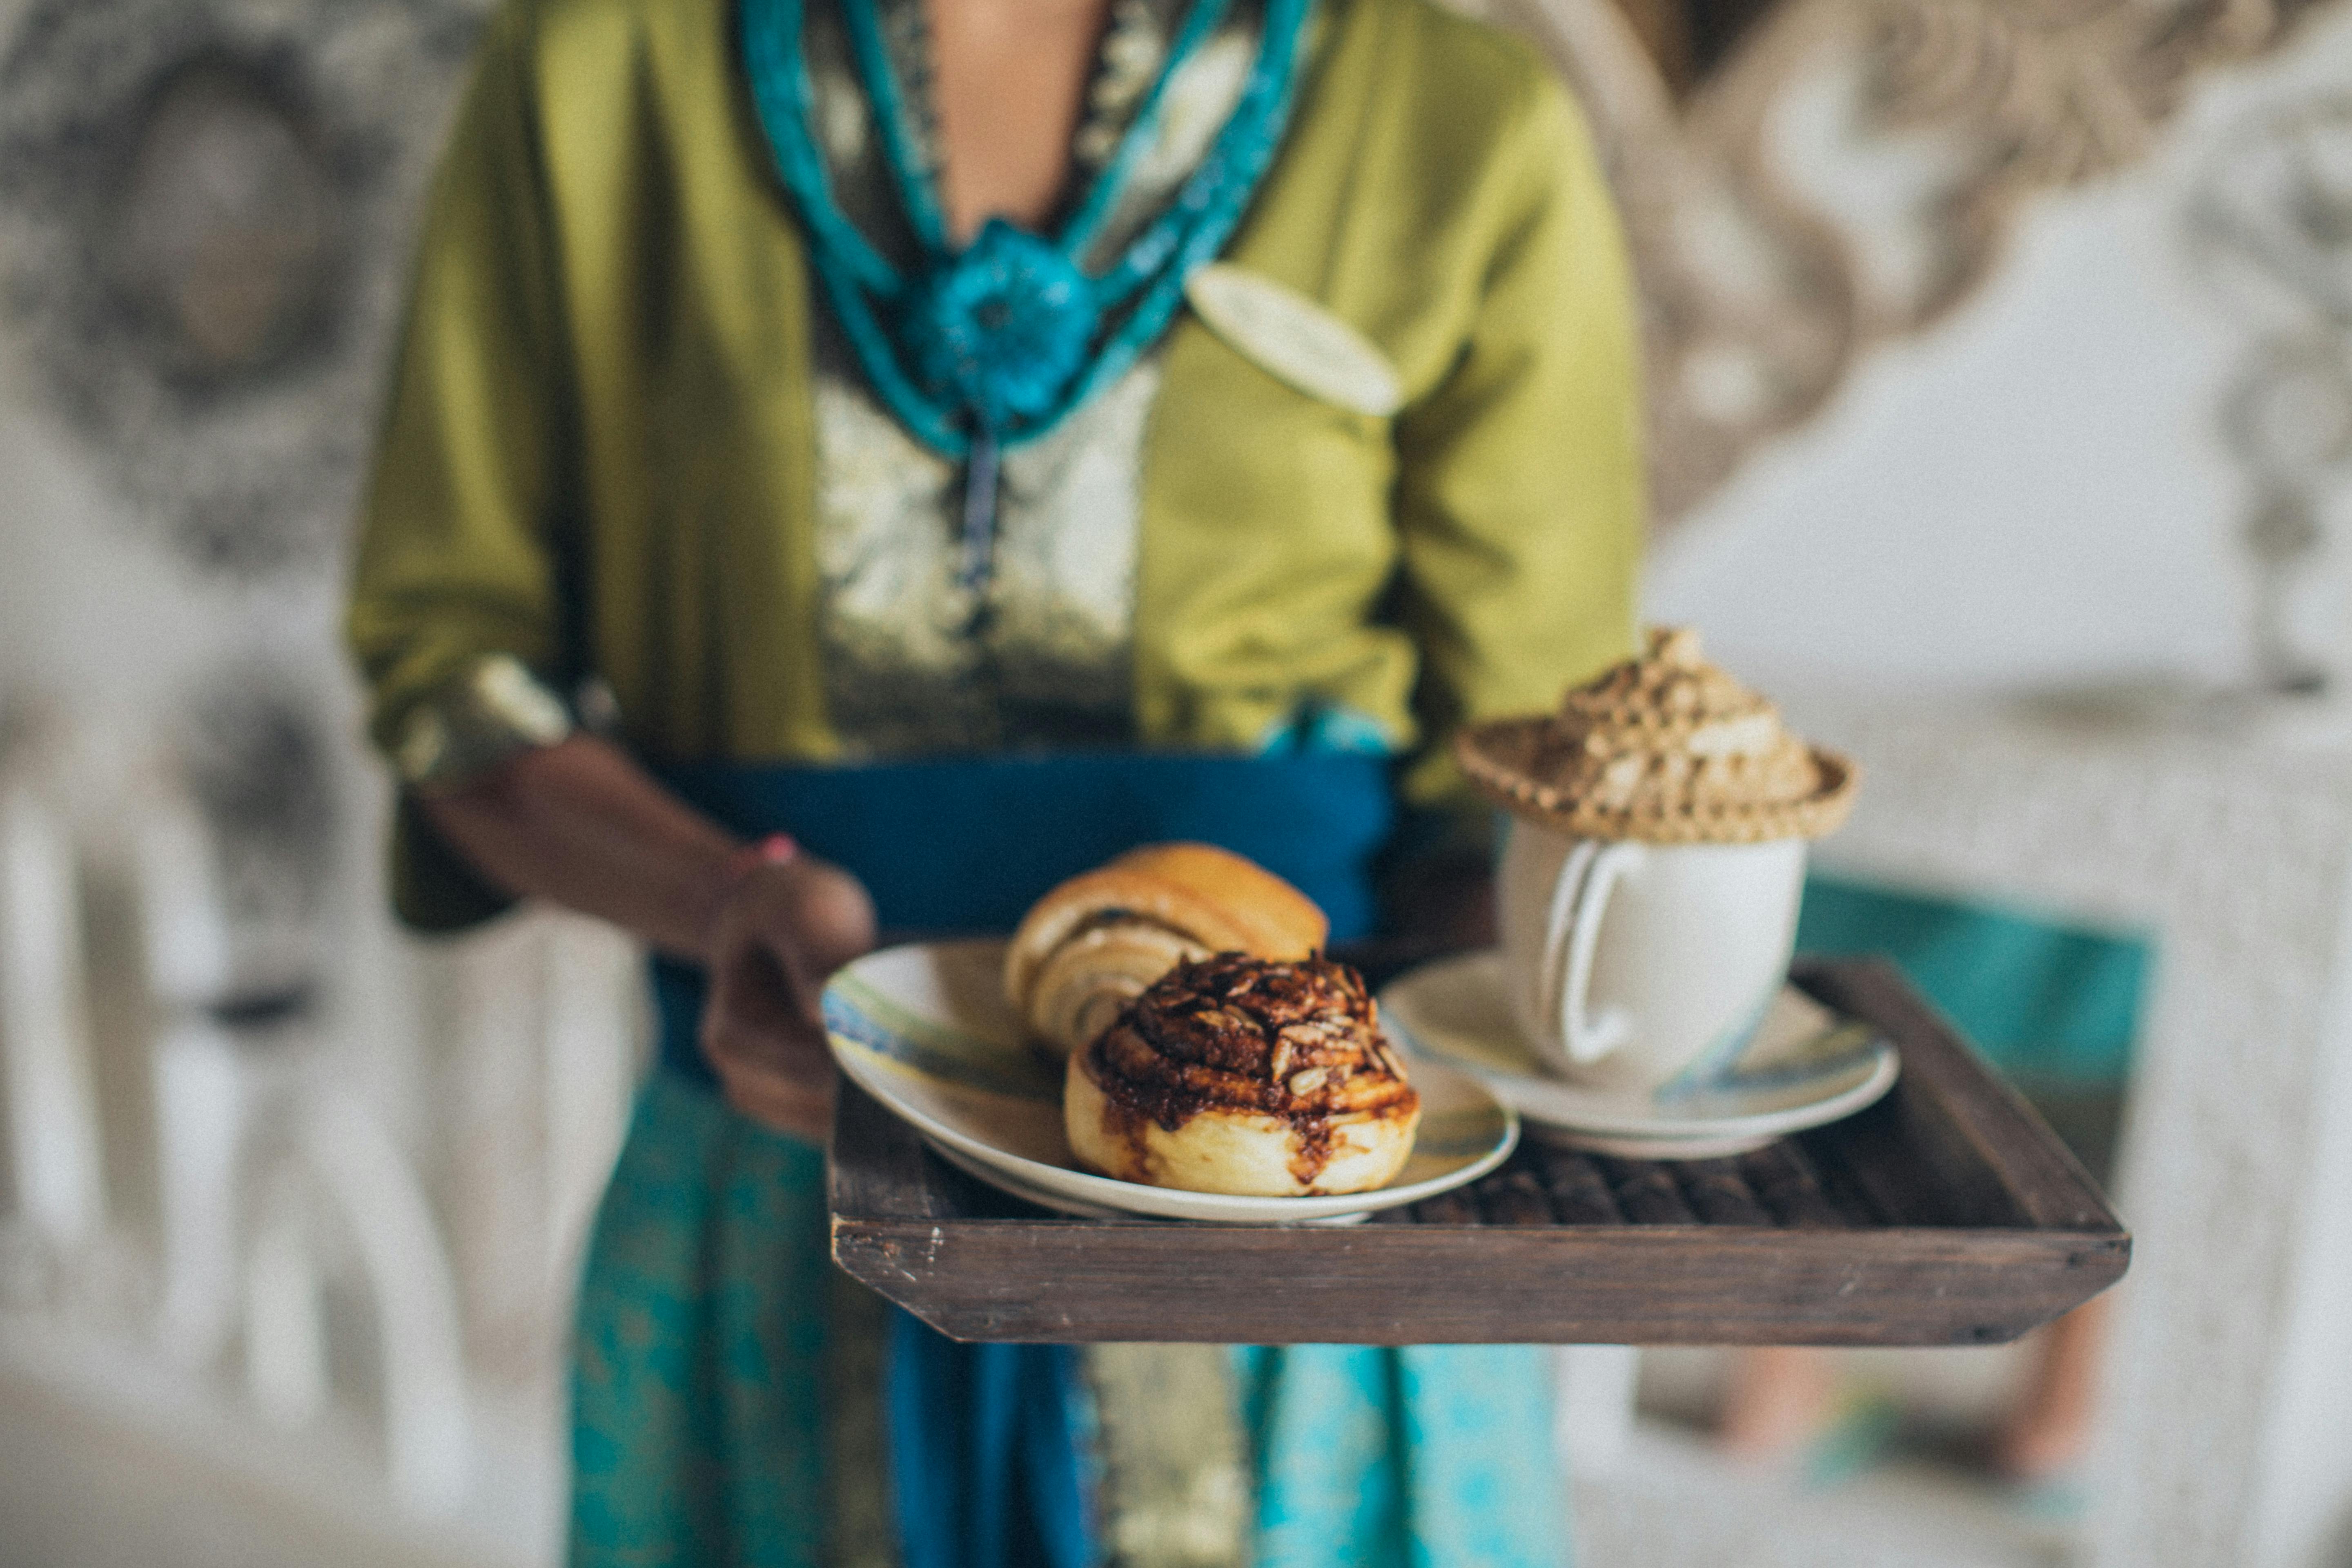 A woman holding some baked goods on a tray | Source: Pexels